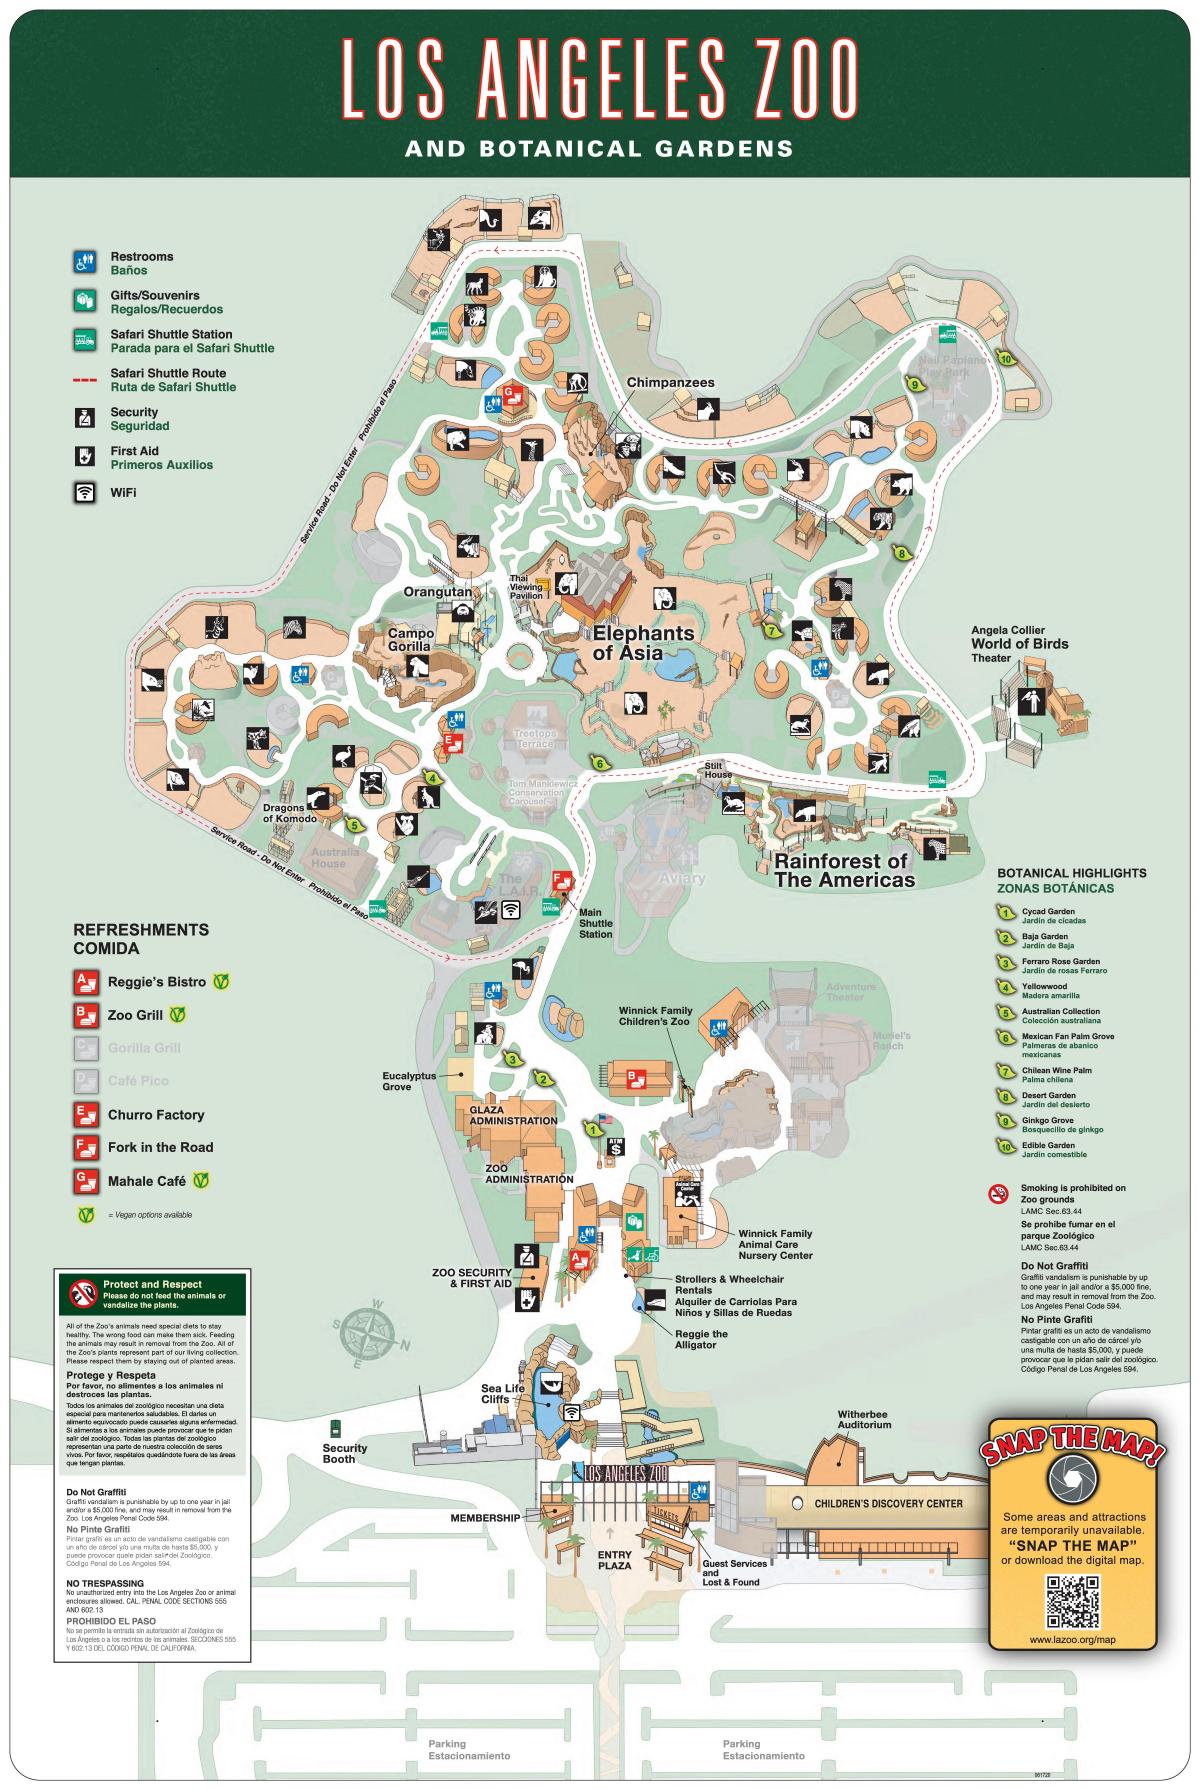 Los Angeles zoo map